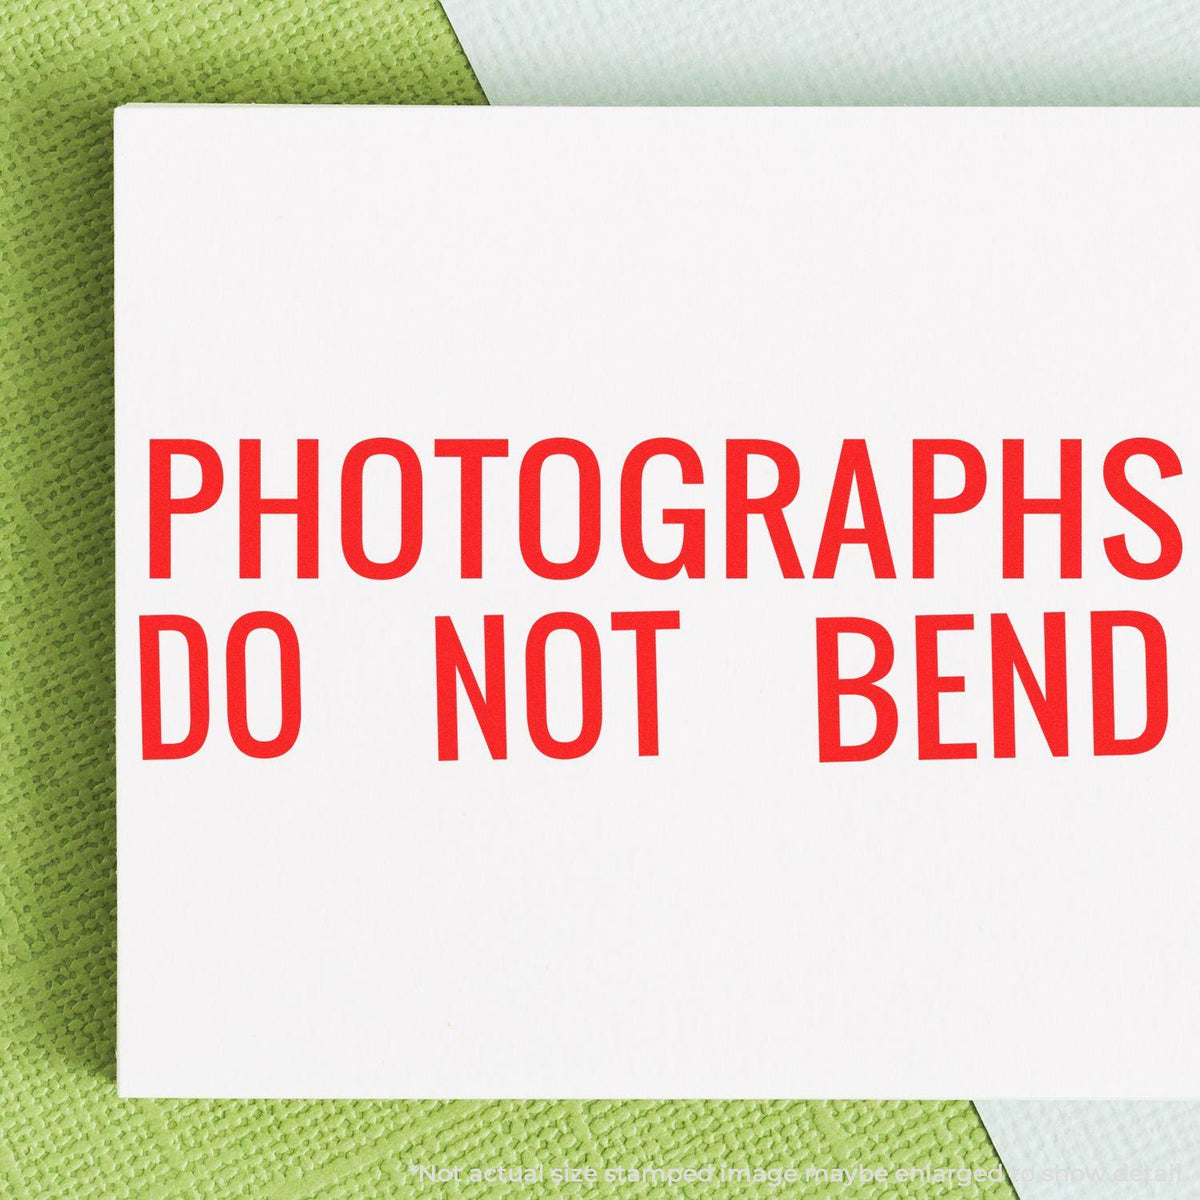 In Use Slim Pre-Inked Photographs Do Not Bend Stamp Image